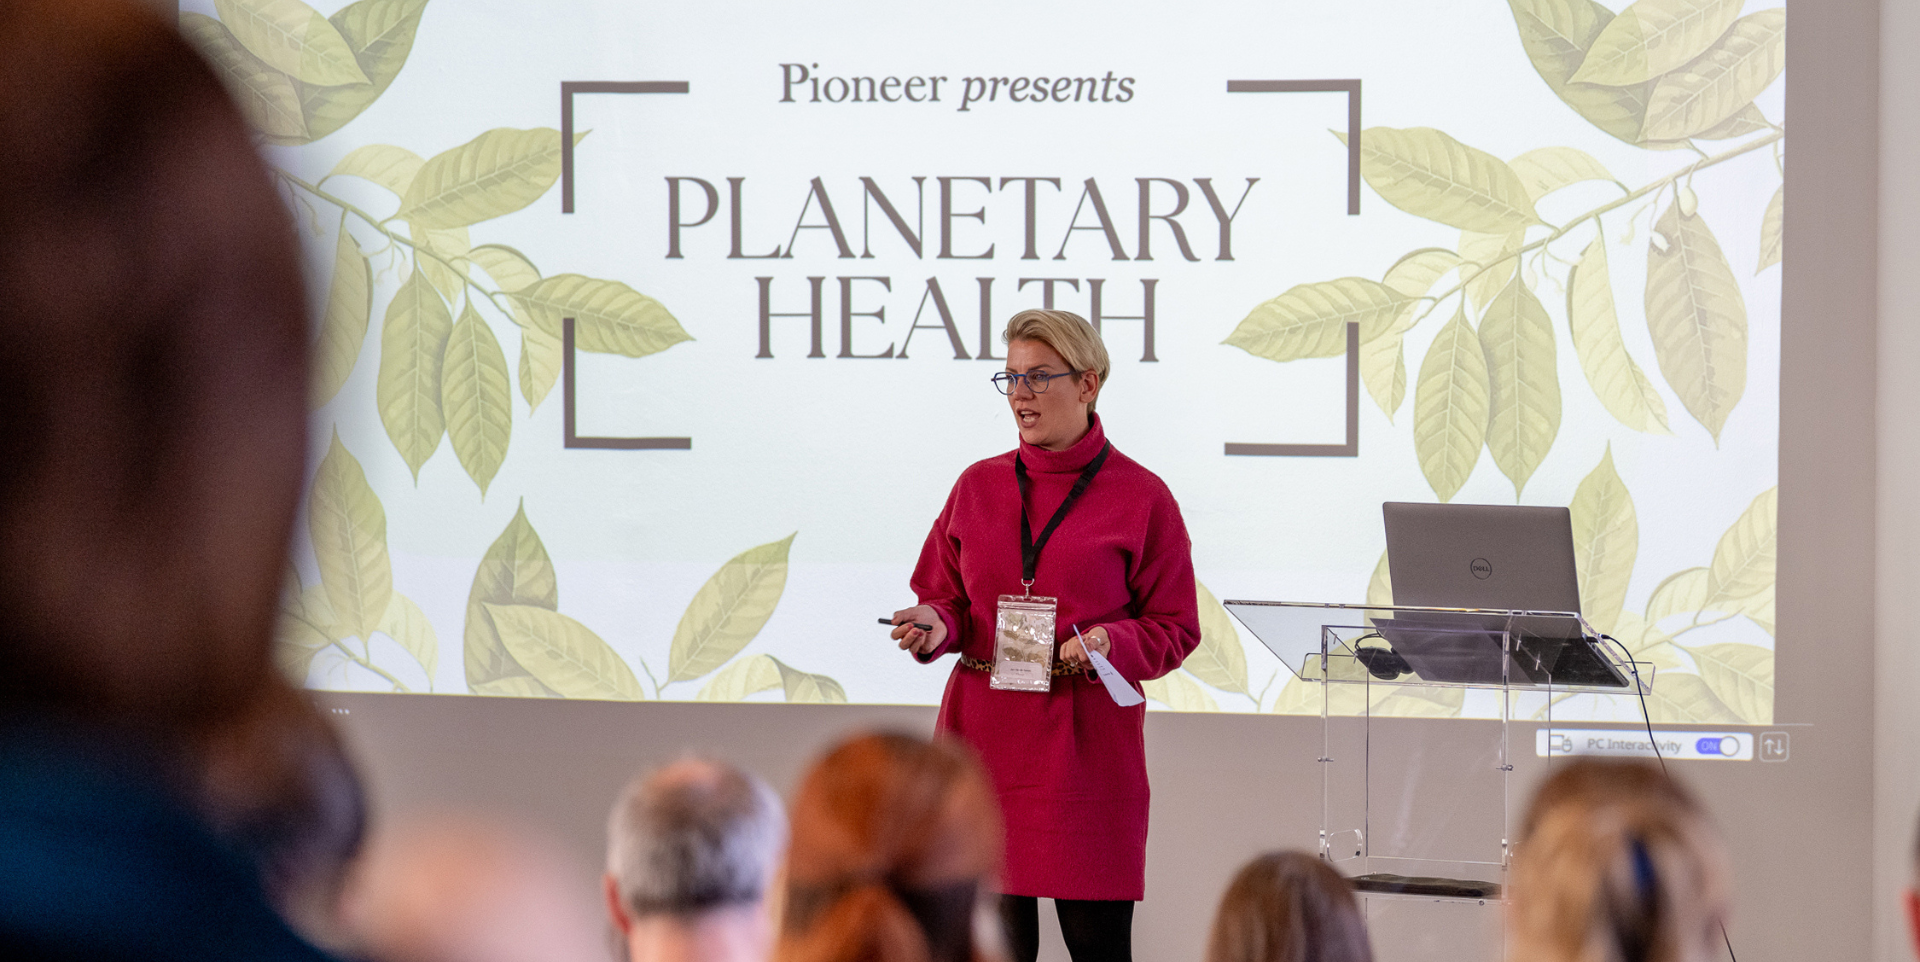 Life science events in the North East - Image shows Jen Vanderhoven presenting at the Pioneer Presents Planetary Health event